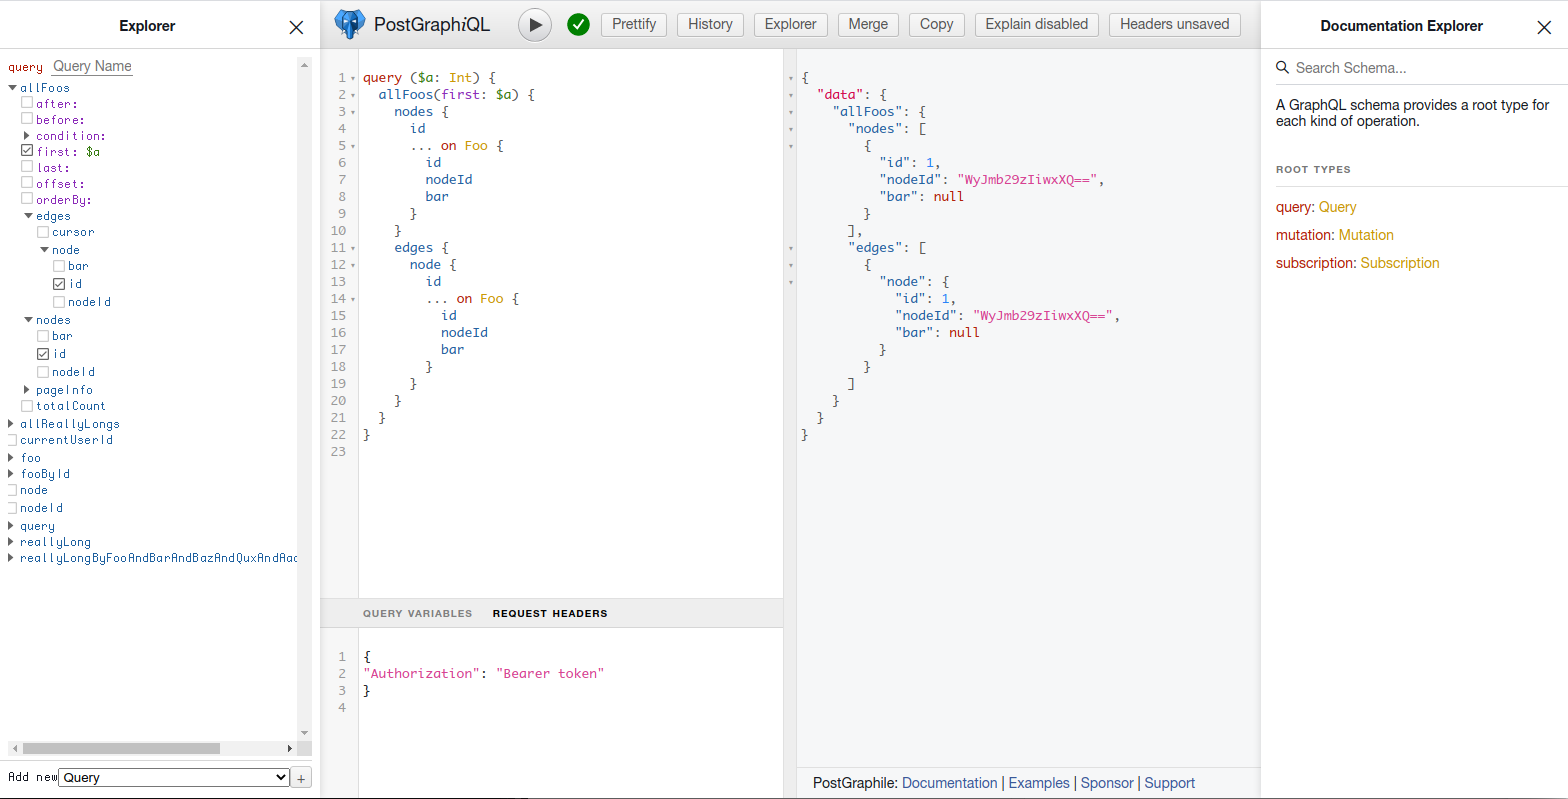 A screenshot of the new improved PostGraphiQL